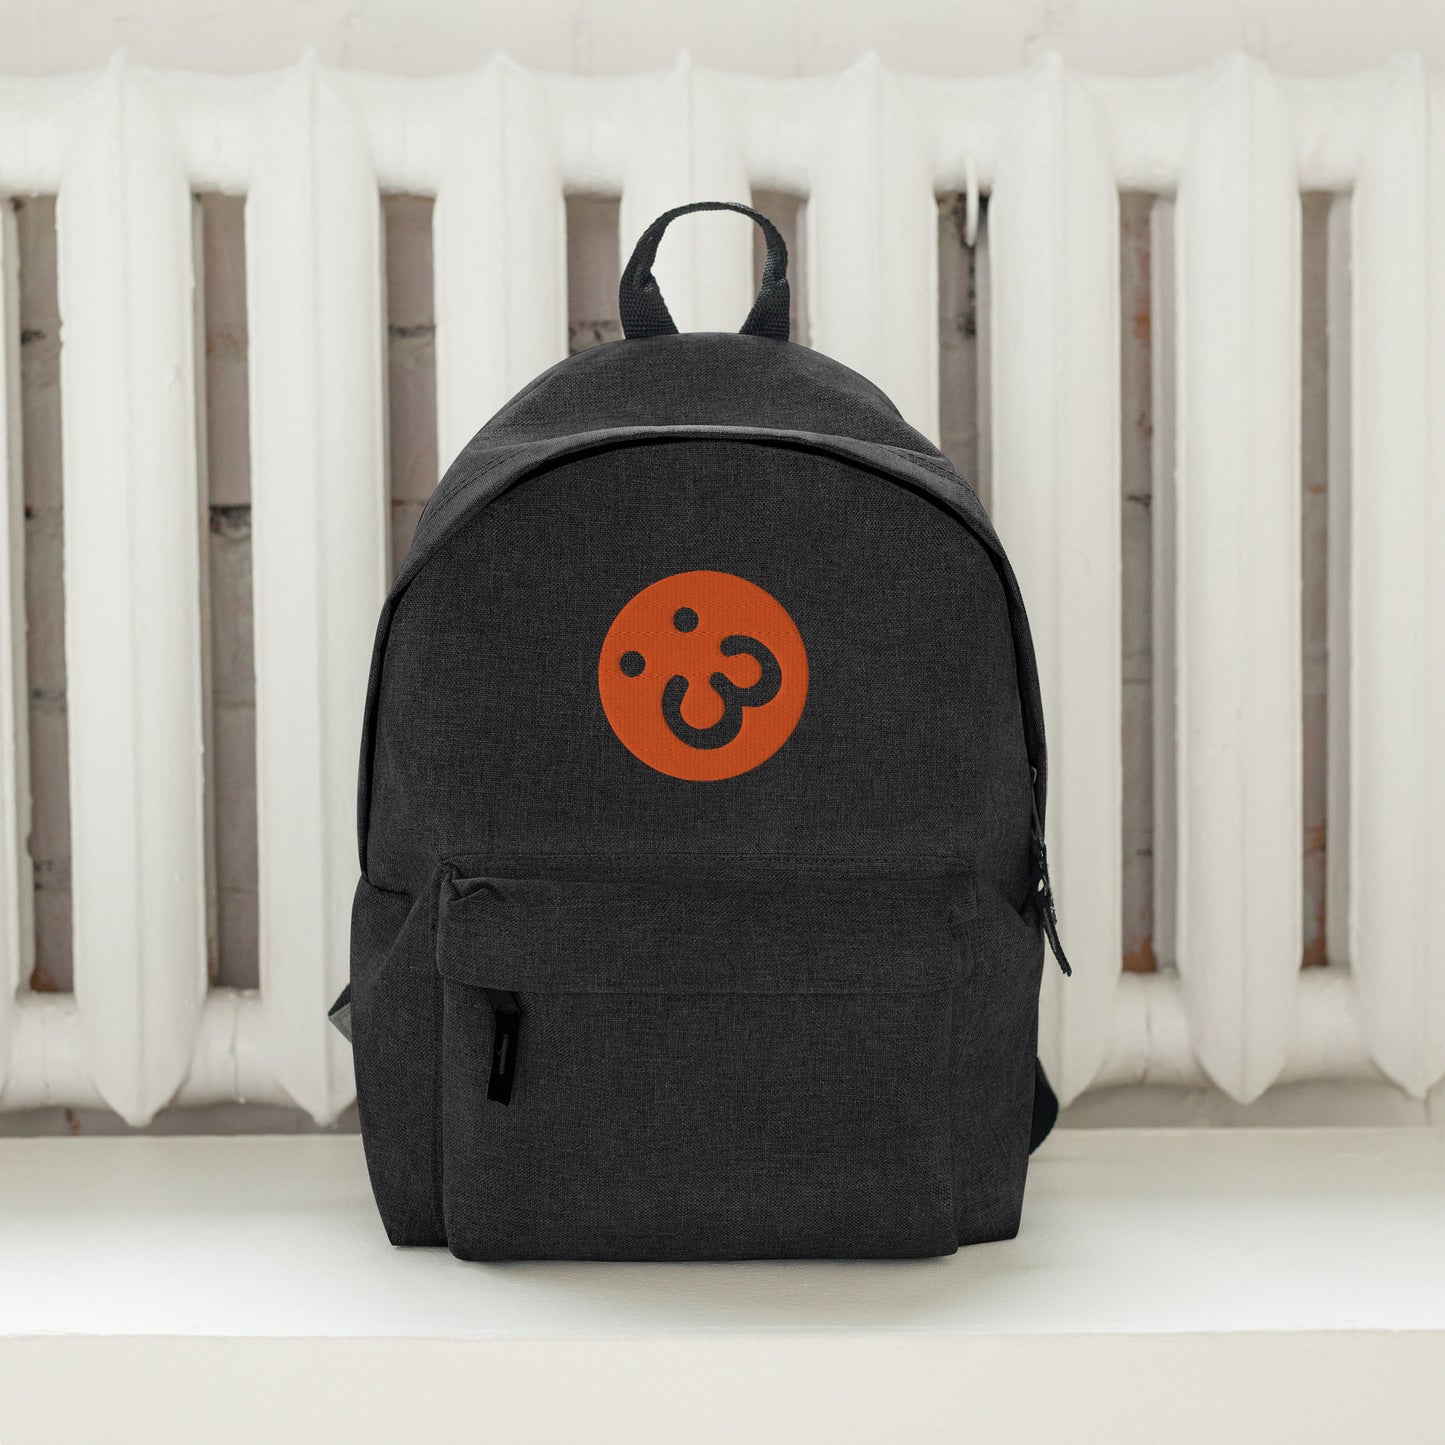 Swag Junkies Embroidered Backpack